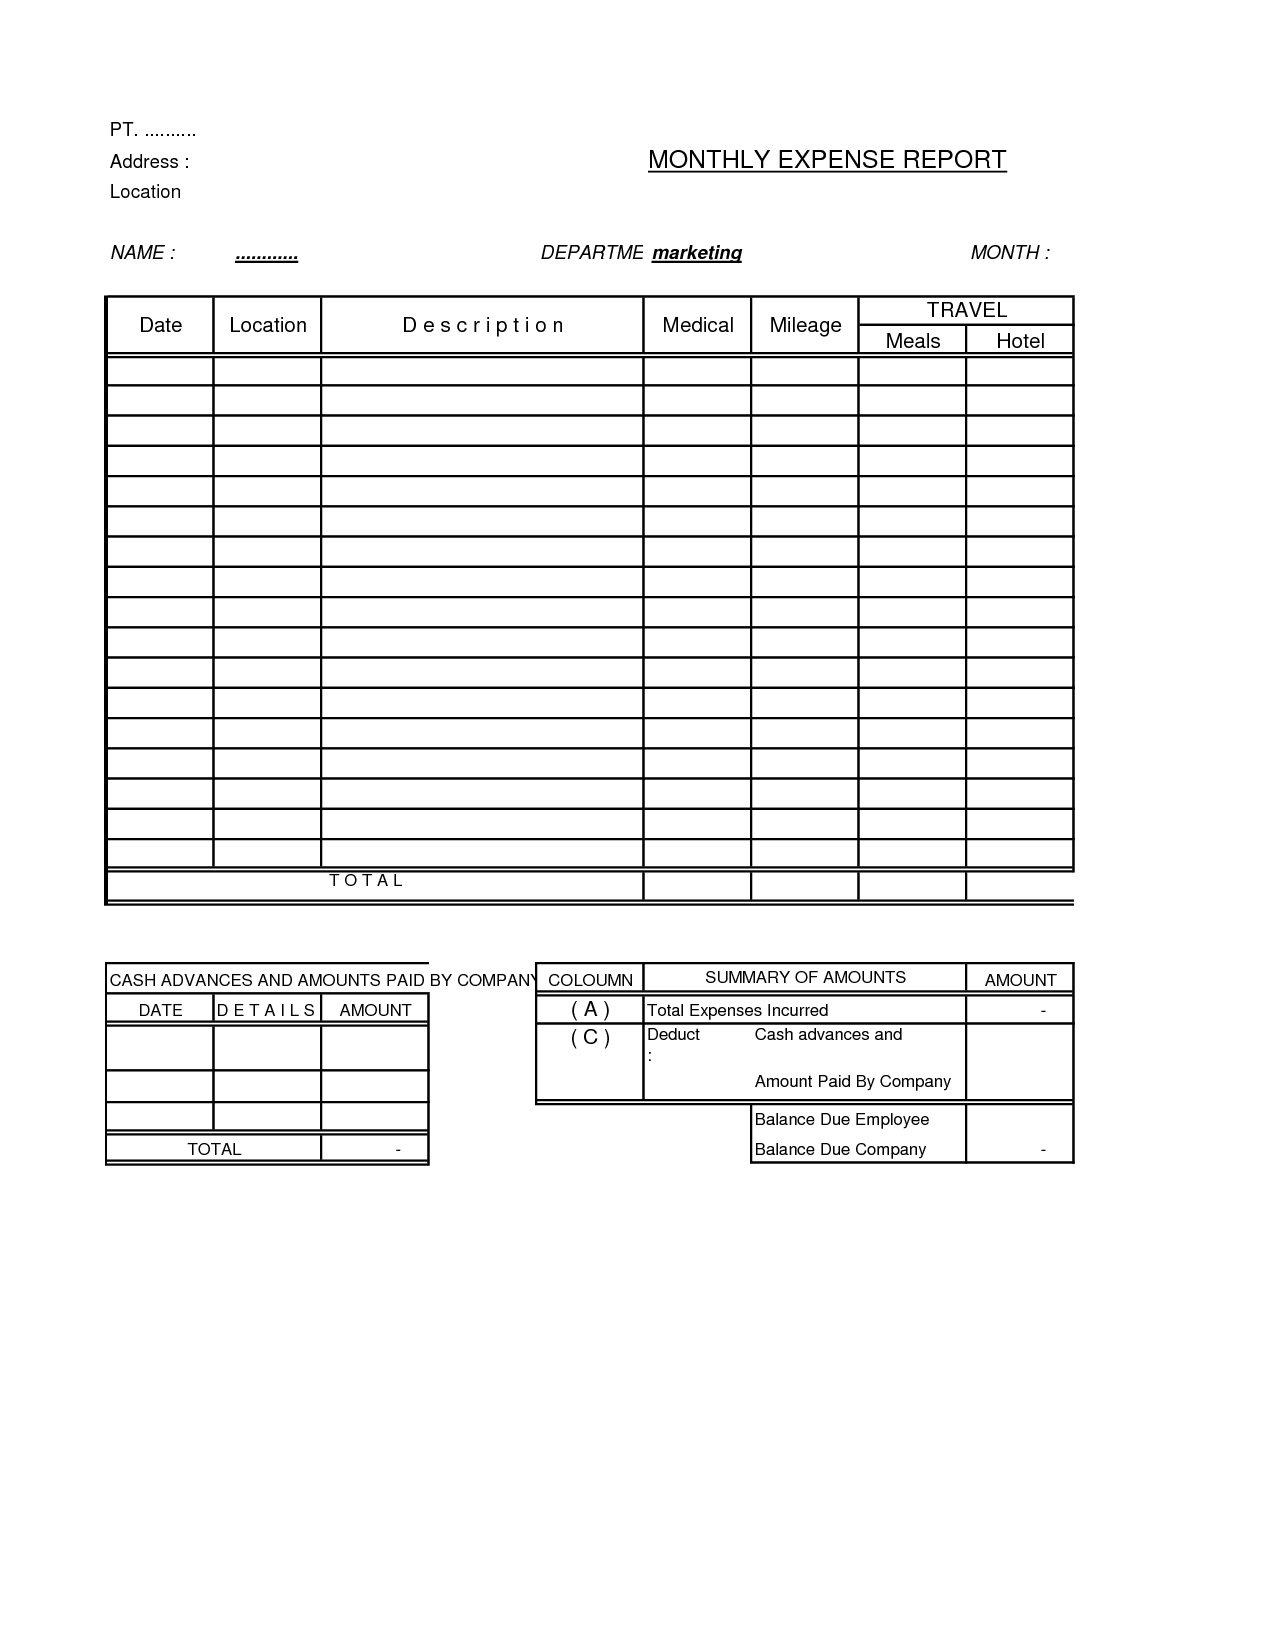 Expense Report Form And Samples For Your Inspirations For Microsoft Word Expense Report Template